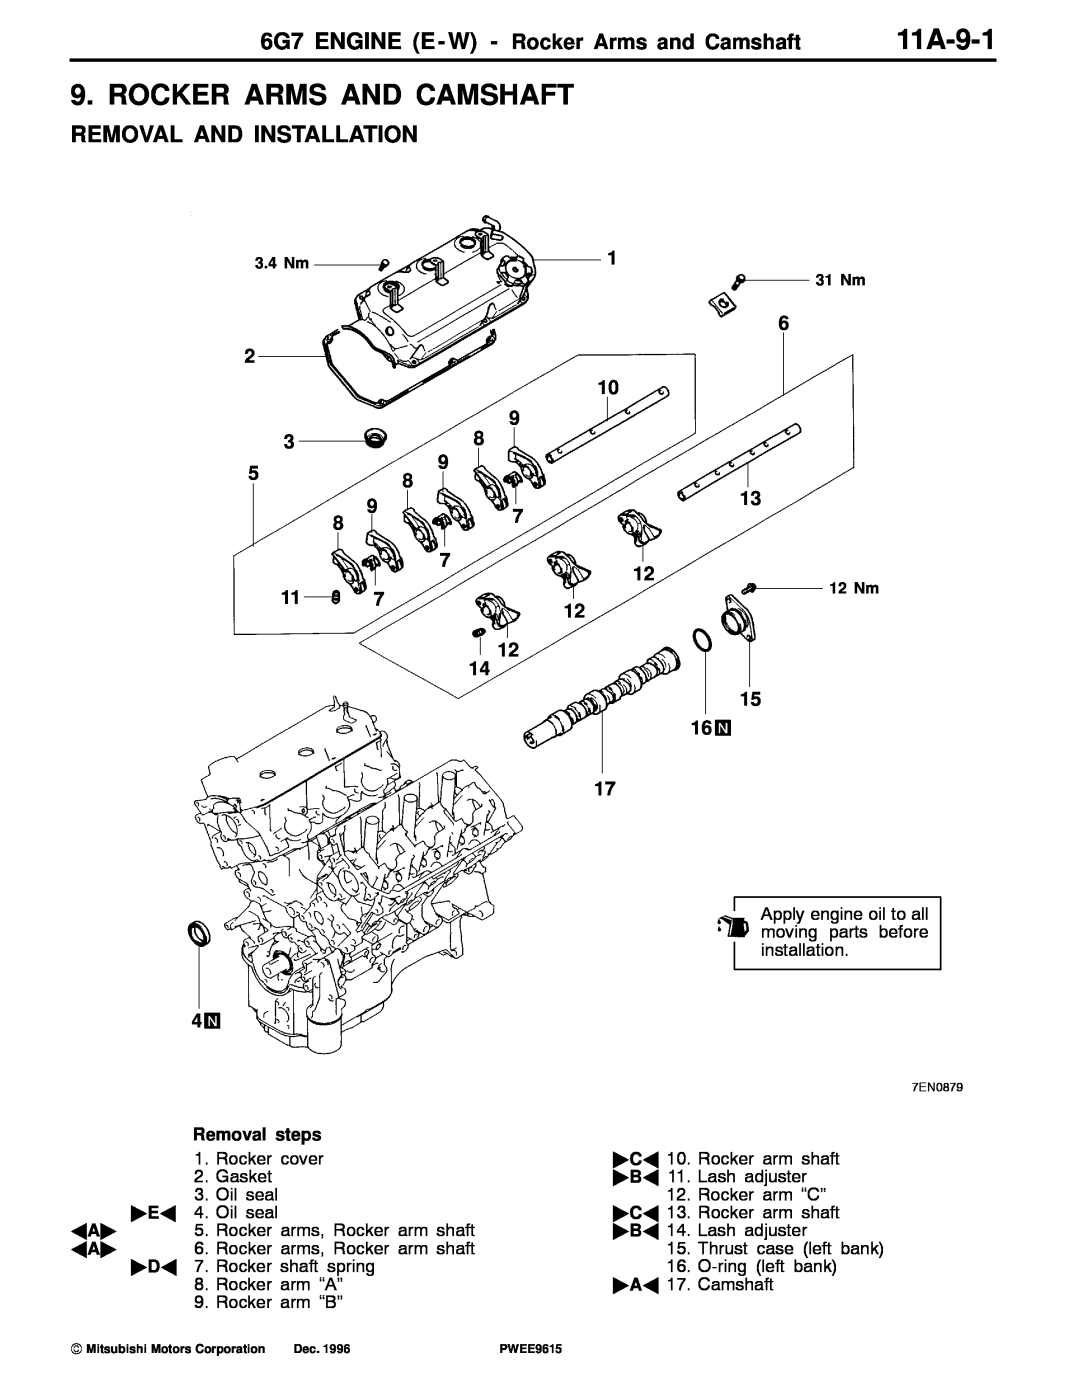 Mitsubishi specifications Rocker Arms And Camshaft, 11A-9-1, 6G7 ENGINE E - W - Rocker Arms and Camshaft, 6 10 